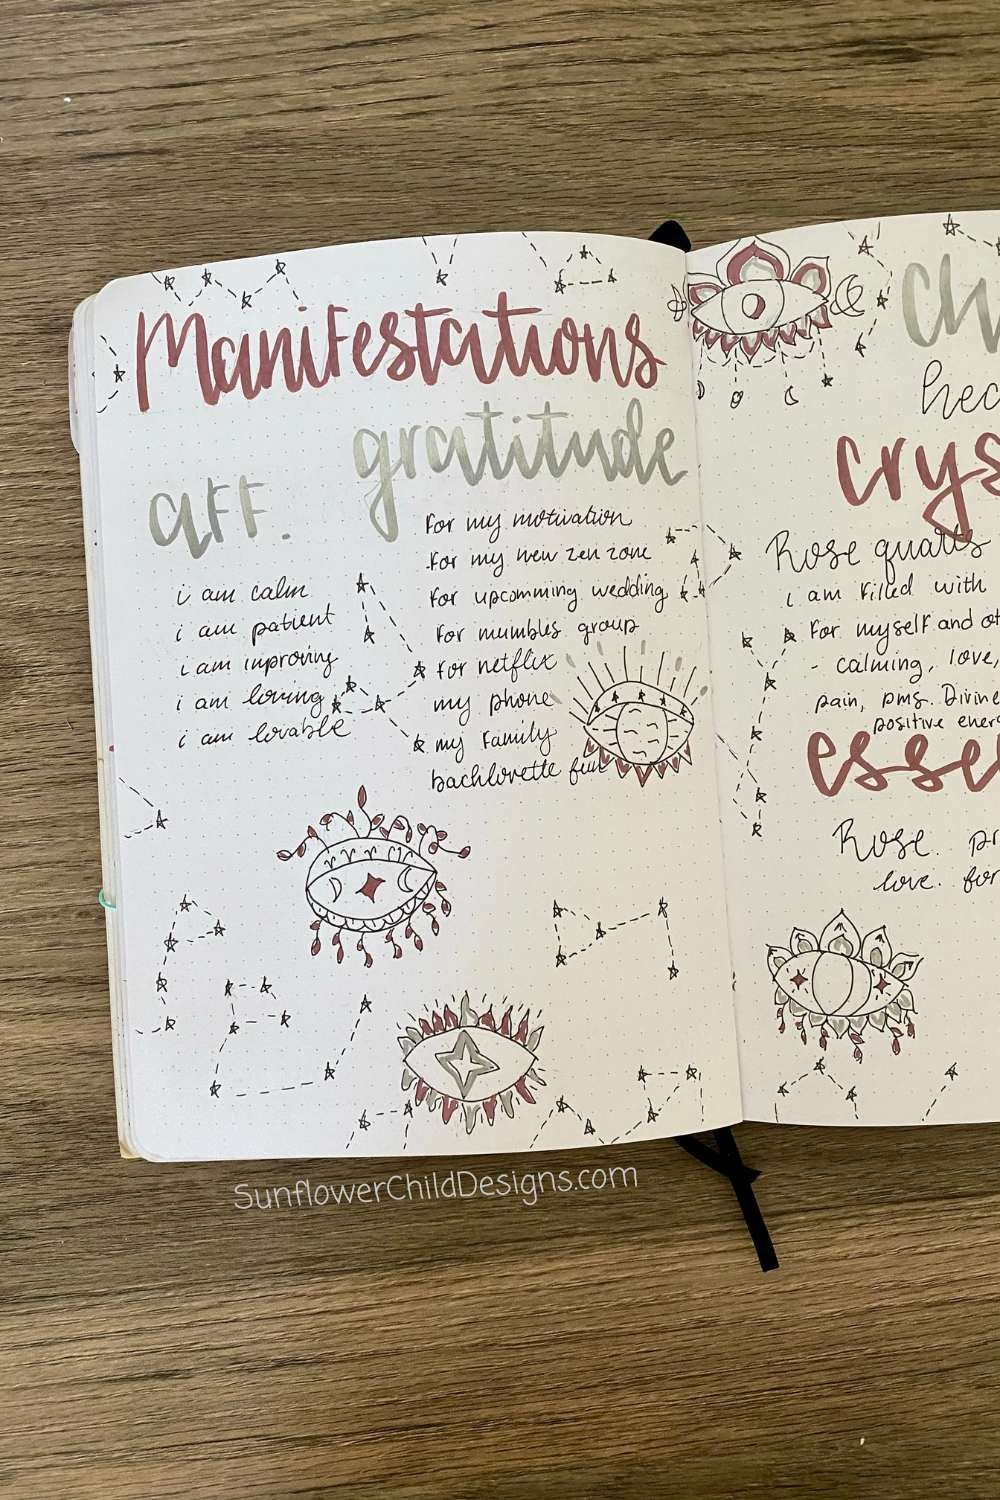 Witchy-Aesthetic-Bullet Journal-Pages-6.jpg